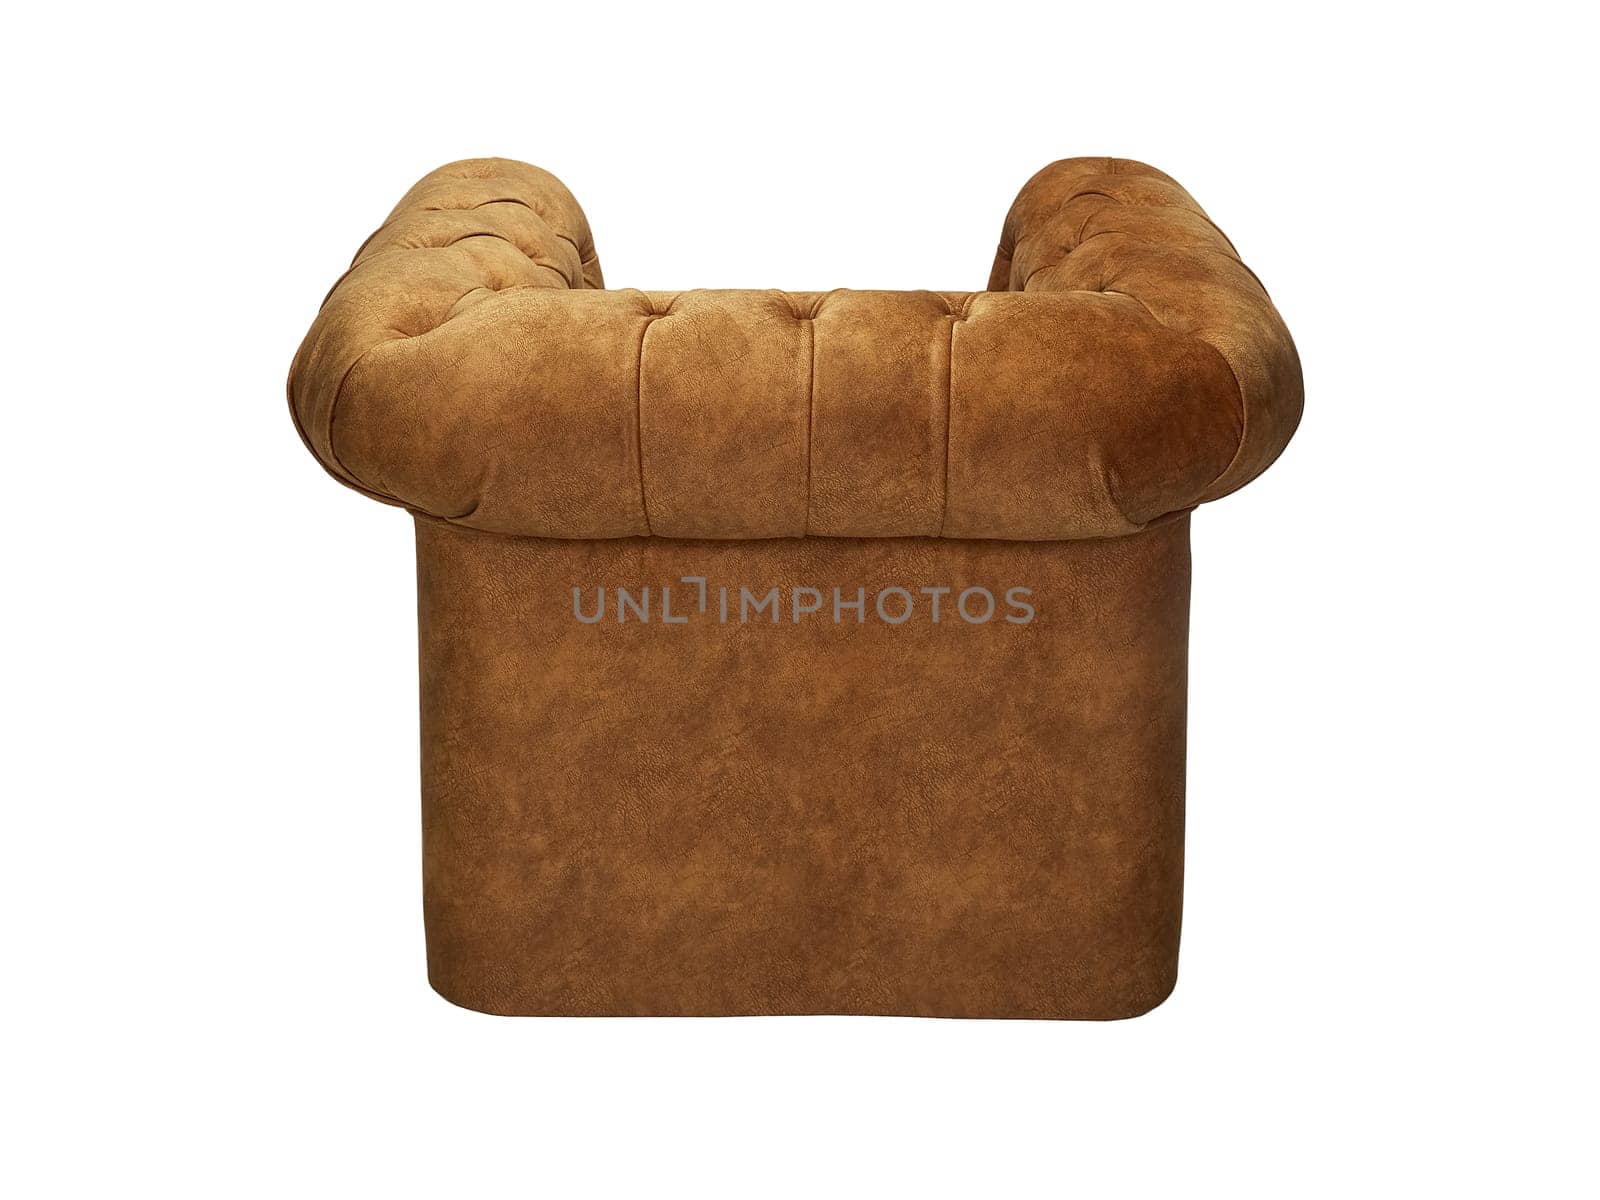 vintage brown leather armchair isolated on white background, back view.